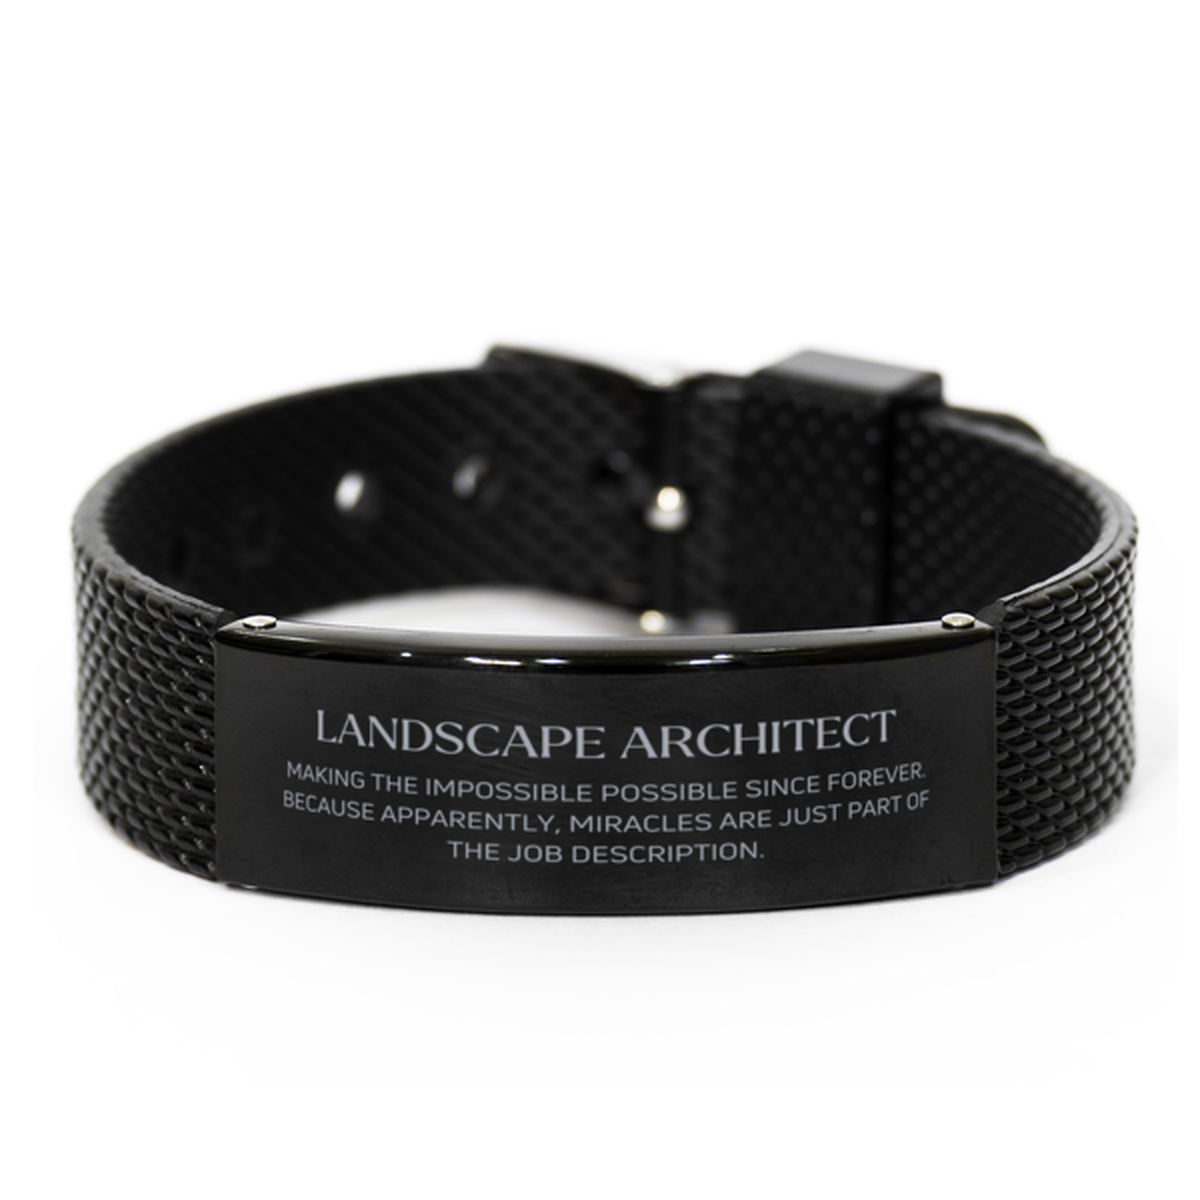 Funny Landscape Architect Gifts, Miracles are just part of the job description, Inspirational Birthday Black Shark Mesh Bracelet For Landscape Architect, Men, Women, Coworkers, Friends, Boss